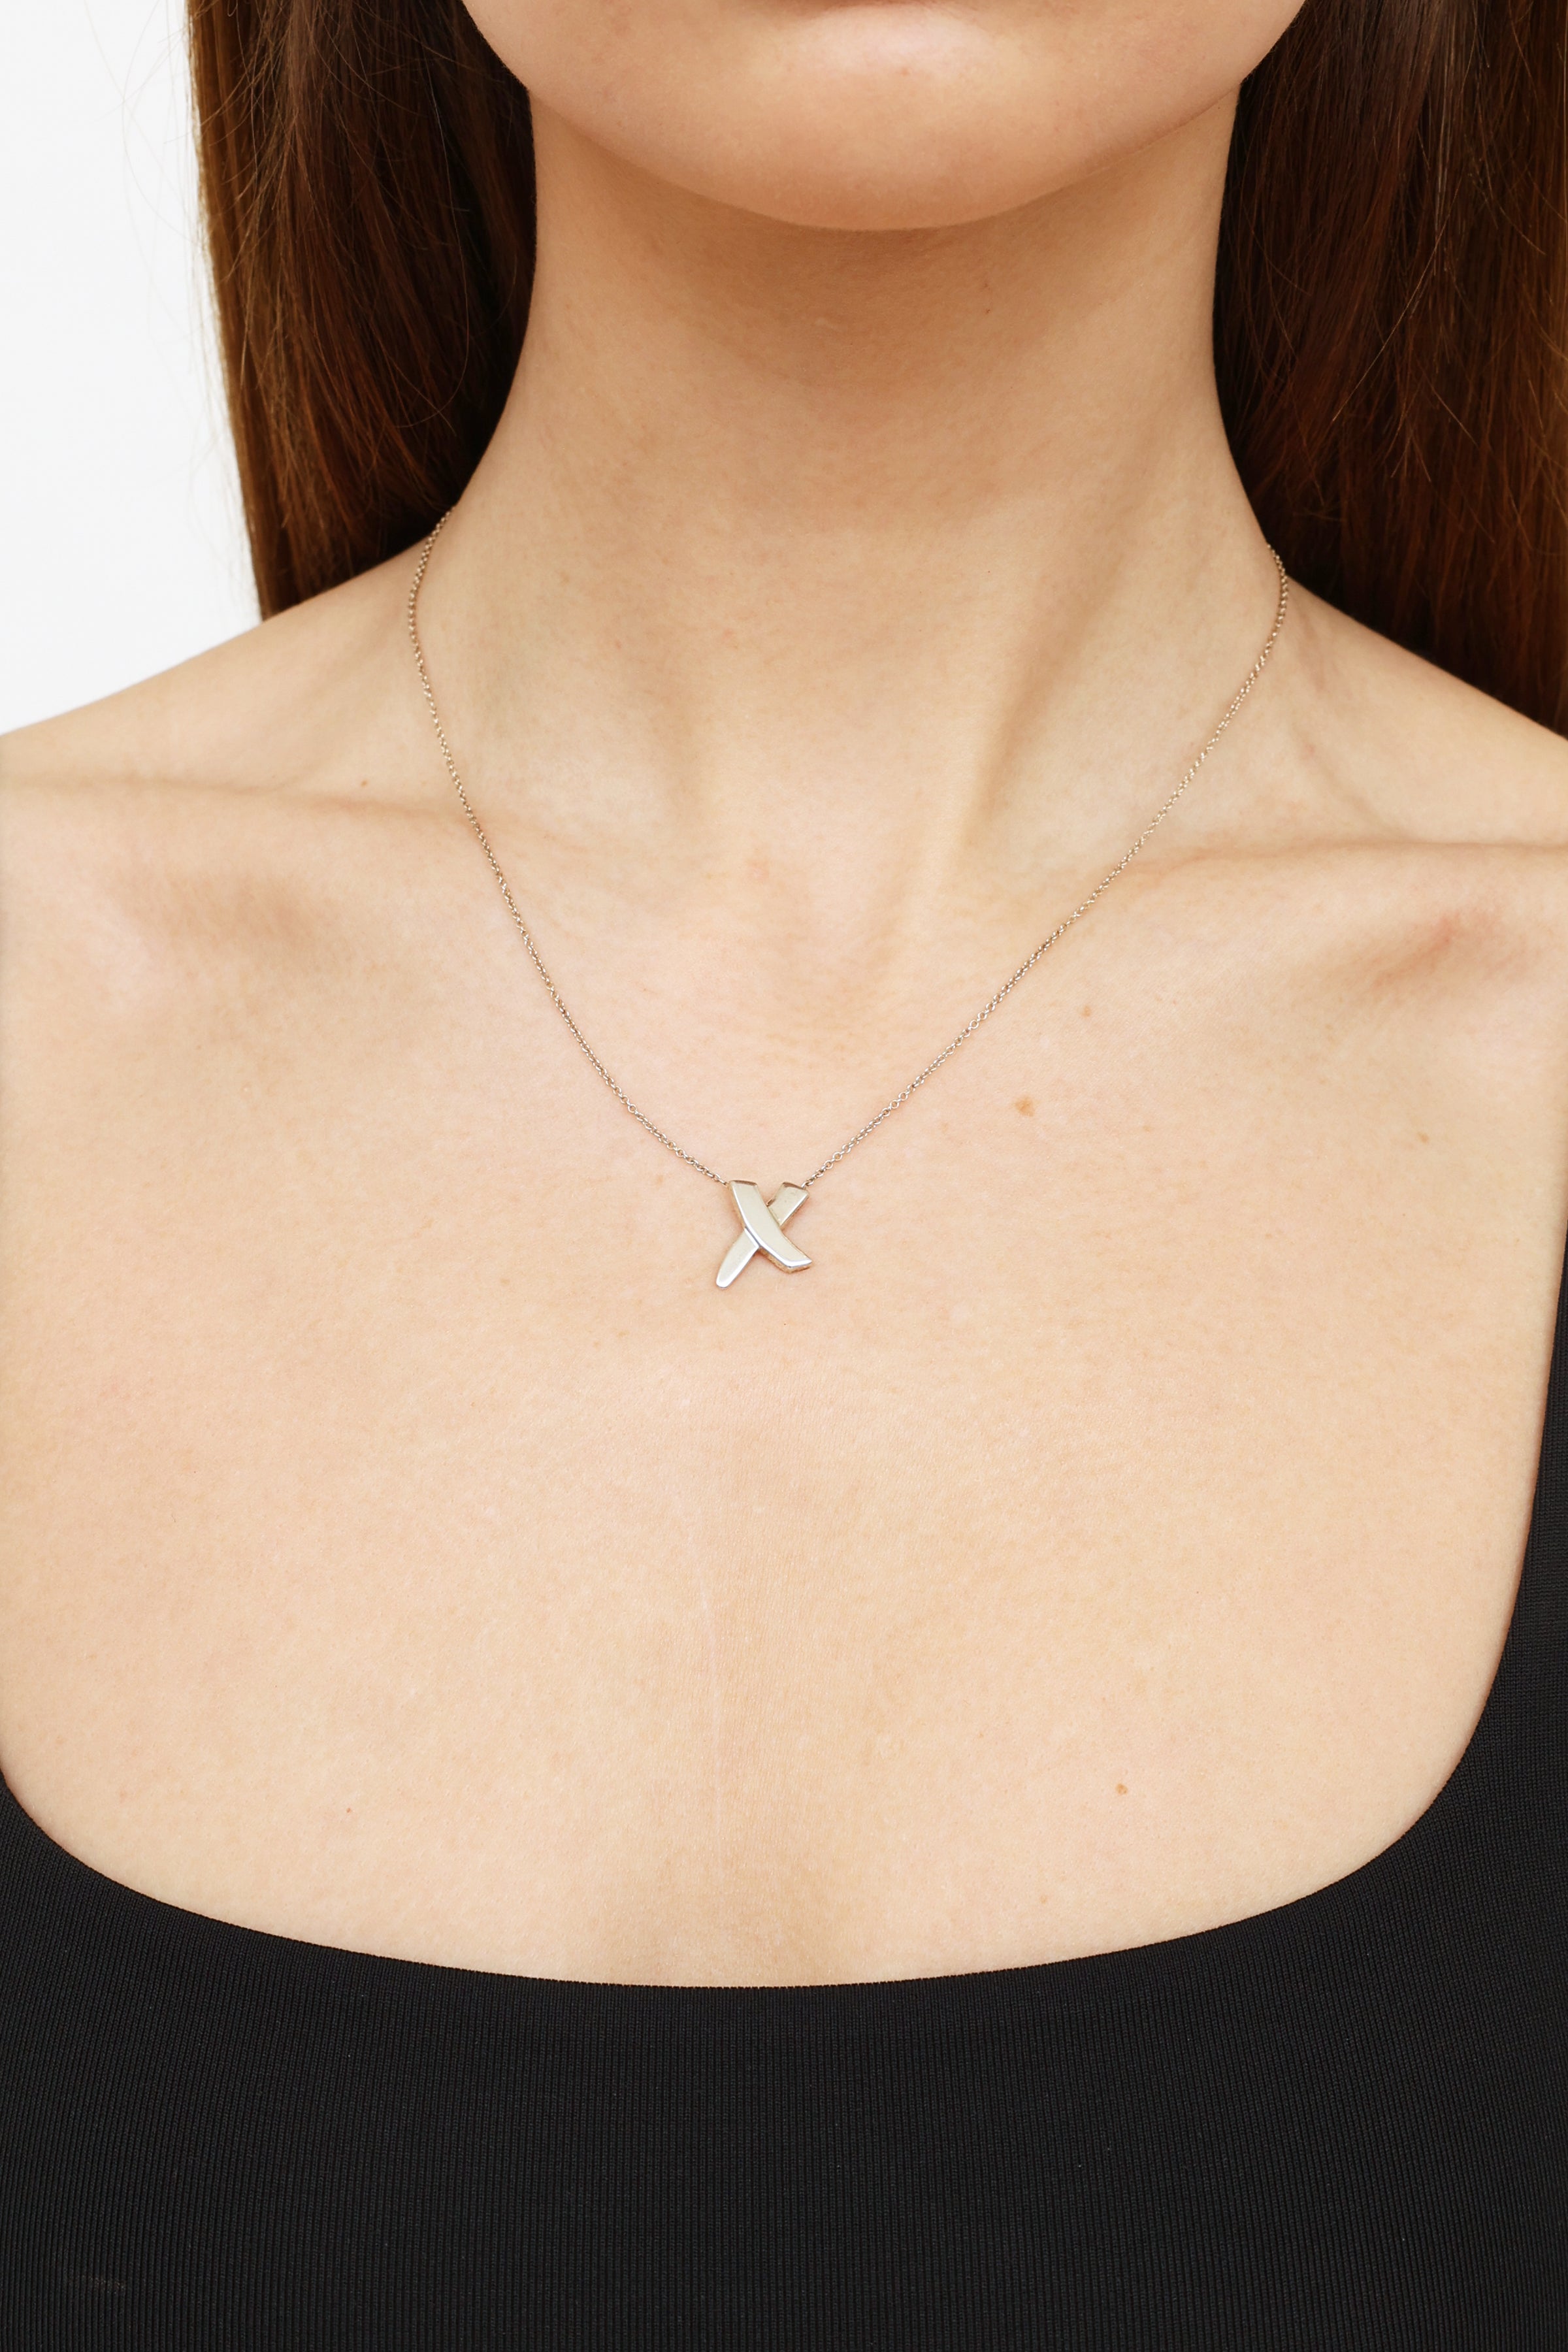 The Atlas® Collection Necklaces & Pendants | Tiffany & Co.